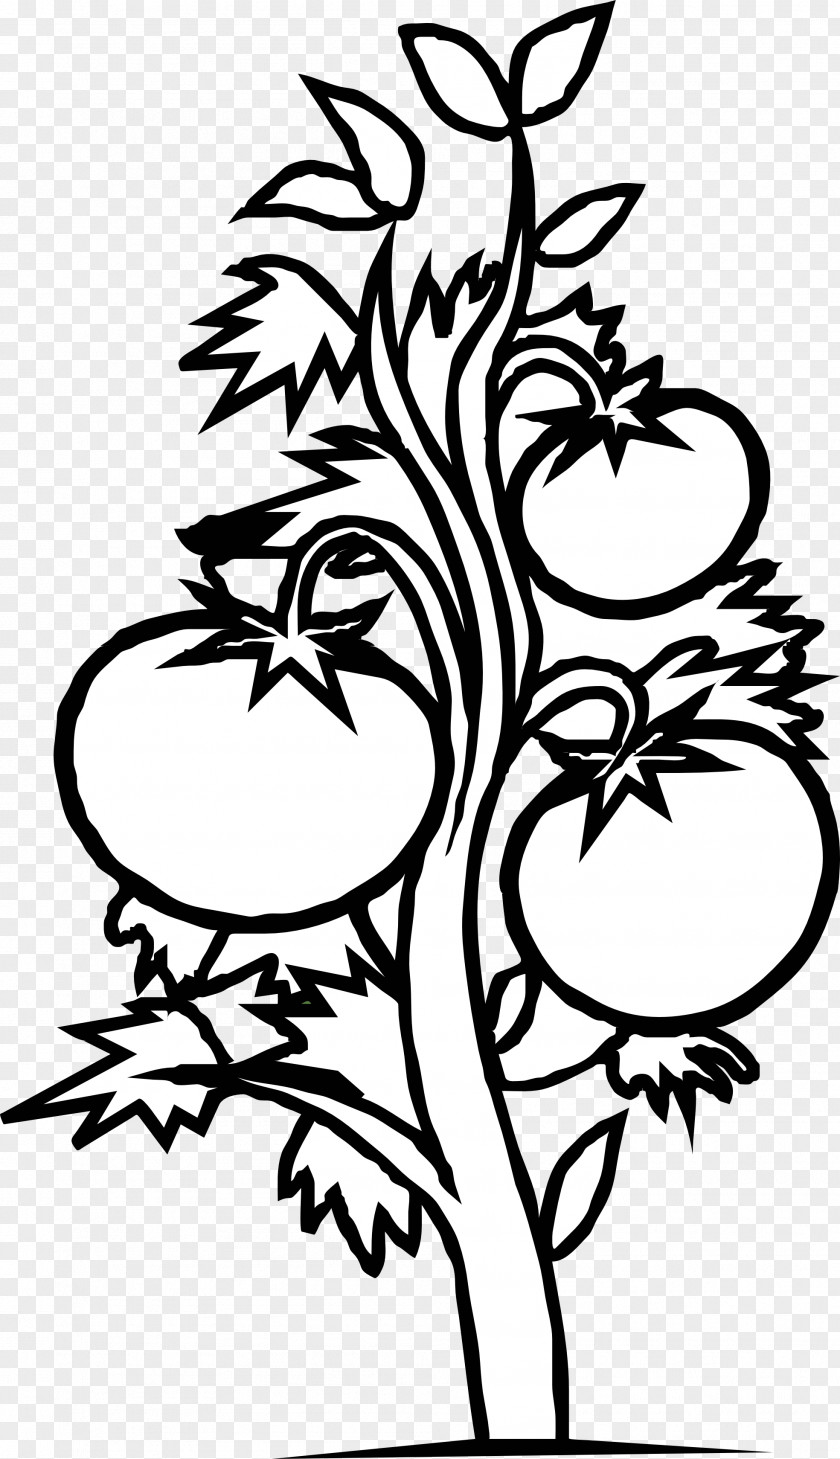 Seedling Cliparts Tomato Plant Black And White Vegetable Clip Art PNG